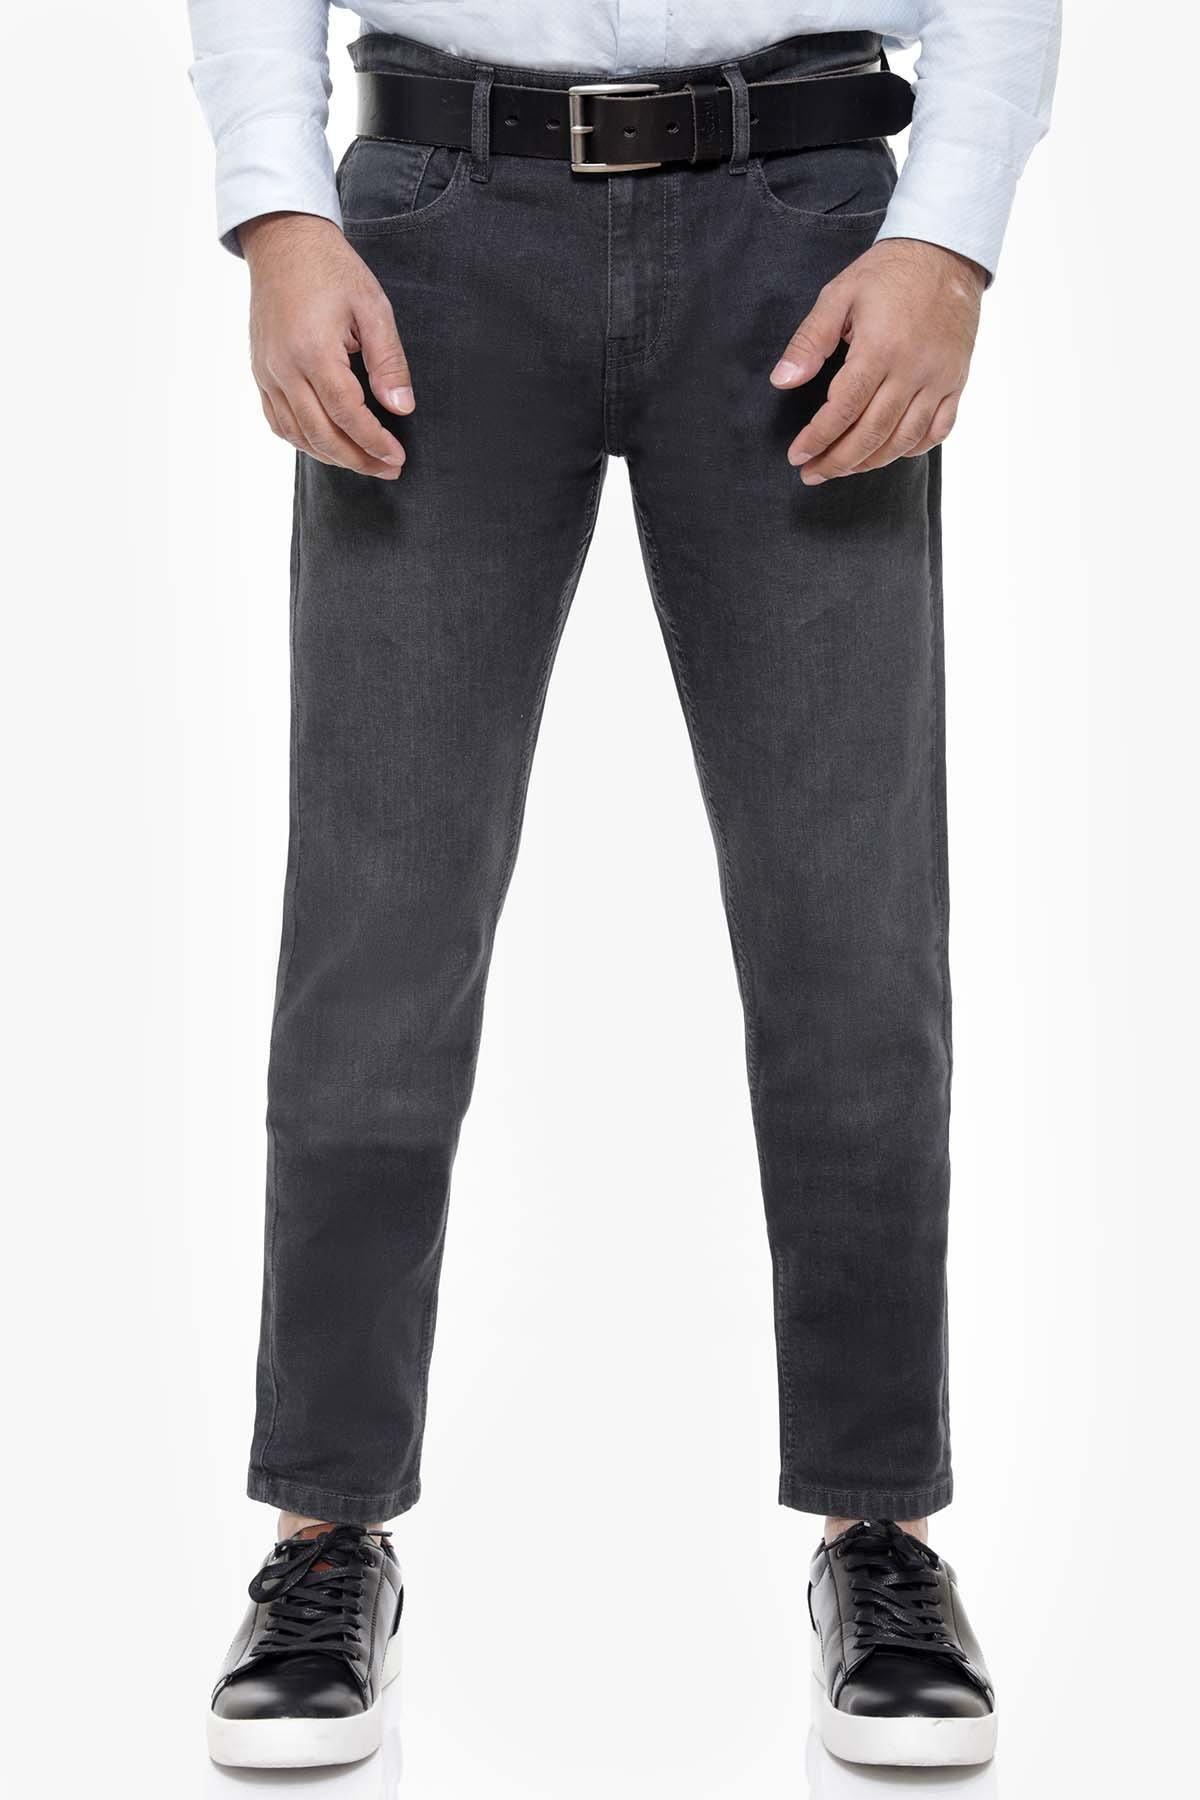 JEAN SLIM FIT GREY at Charcoal Clothing